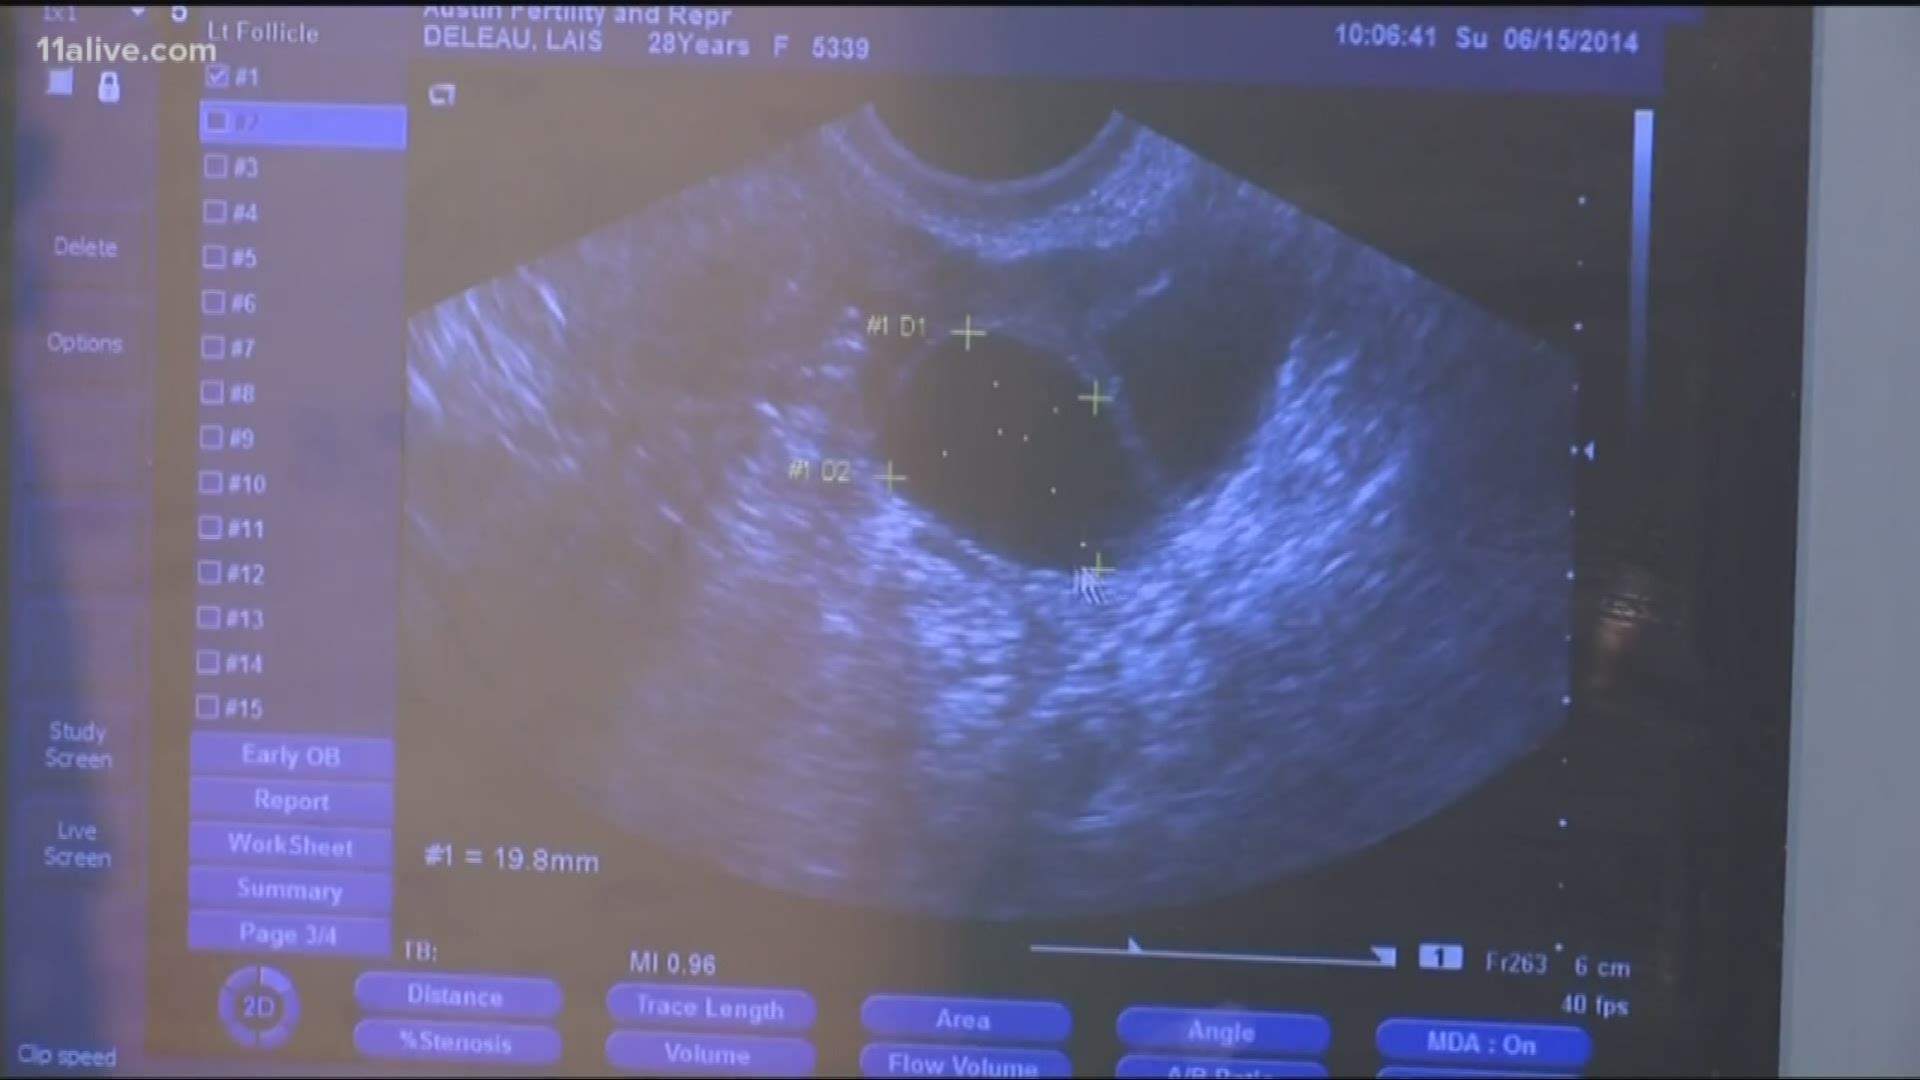 The bill makes it illegal to have an abortion after a fetal heartbeat is detected.